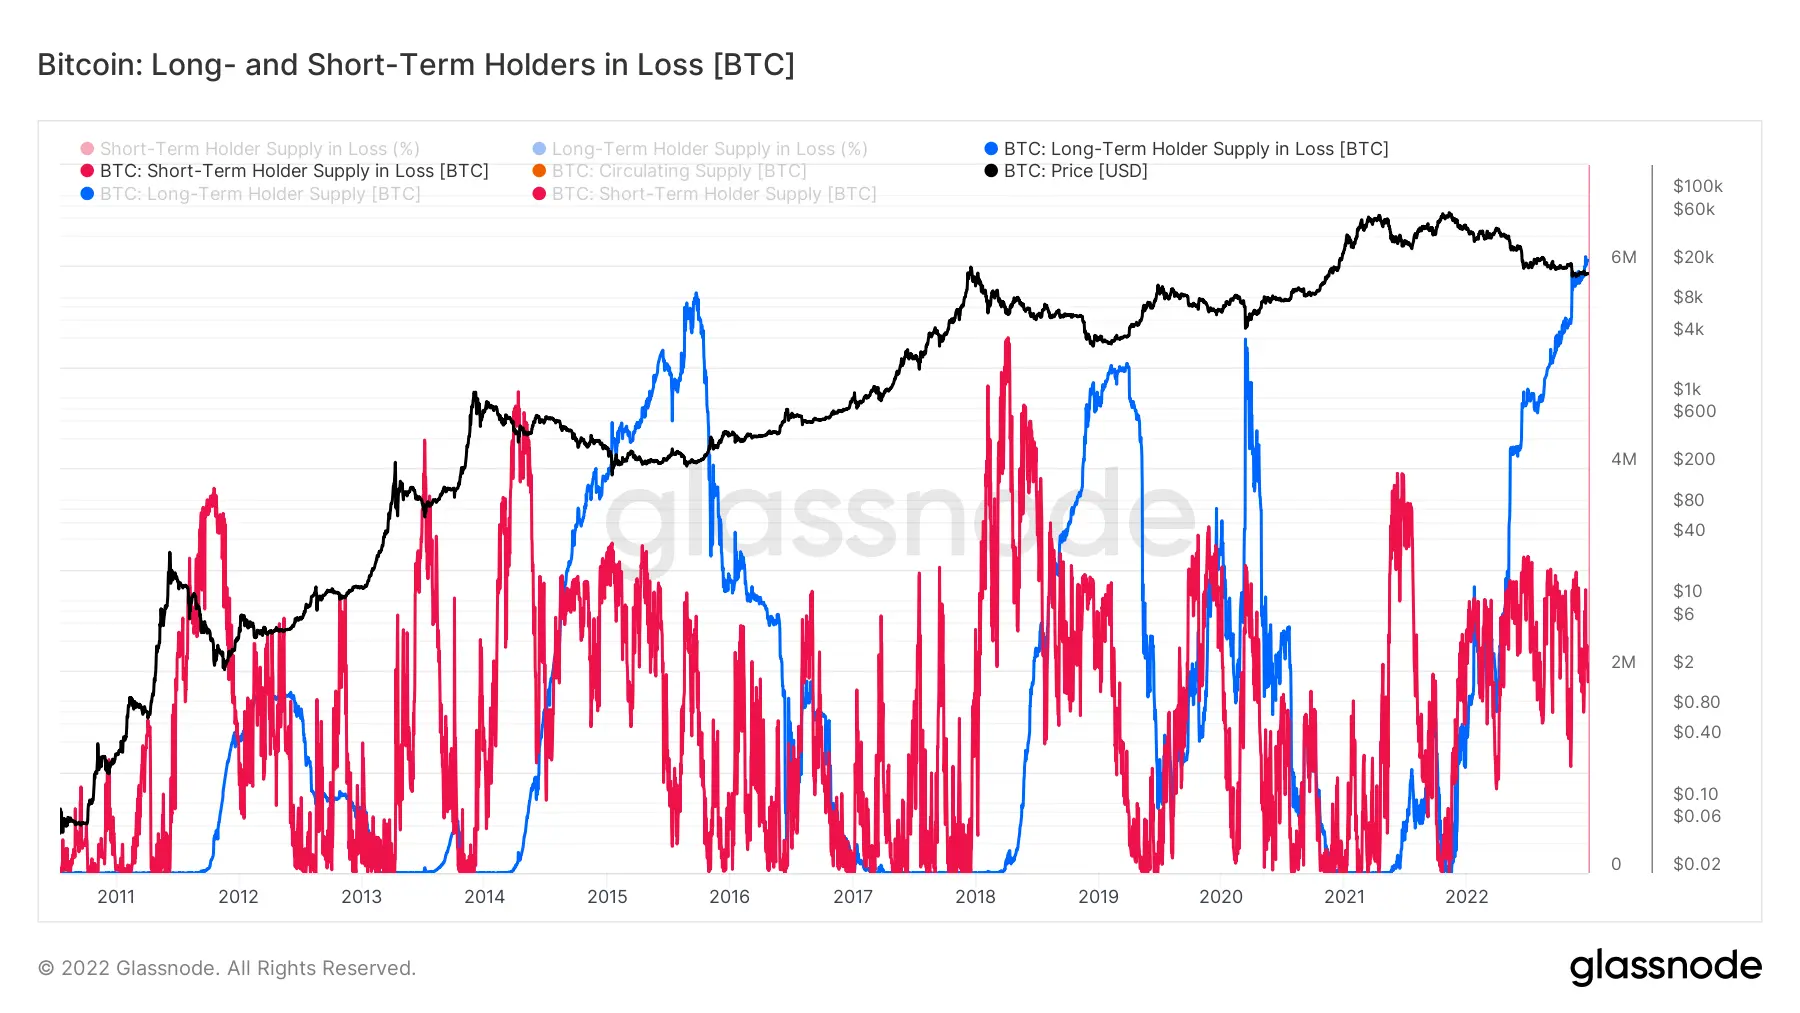 Bitcoin: Long and short-term holders in loss